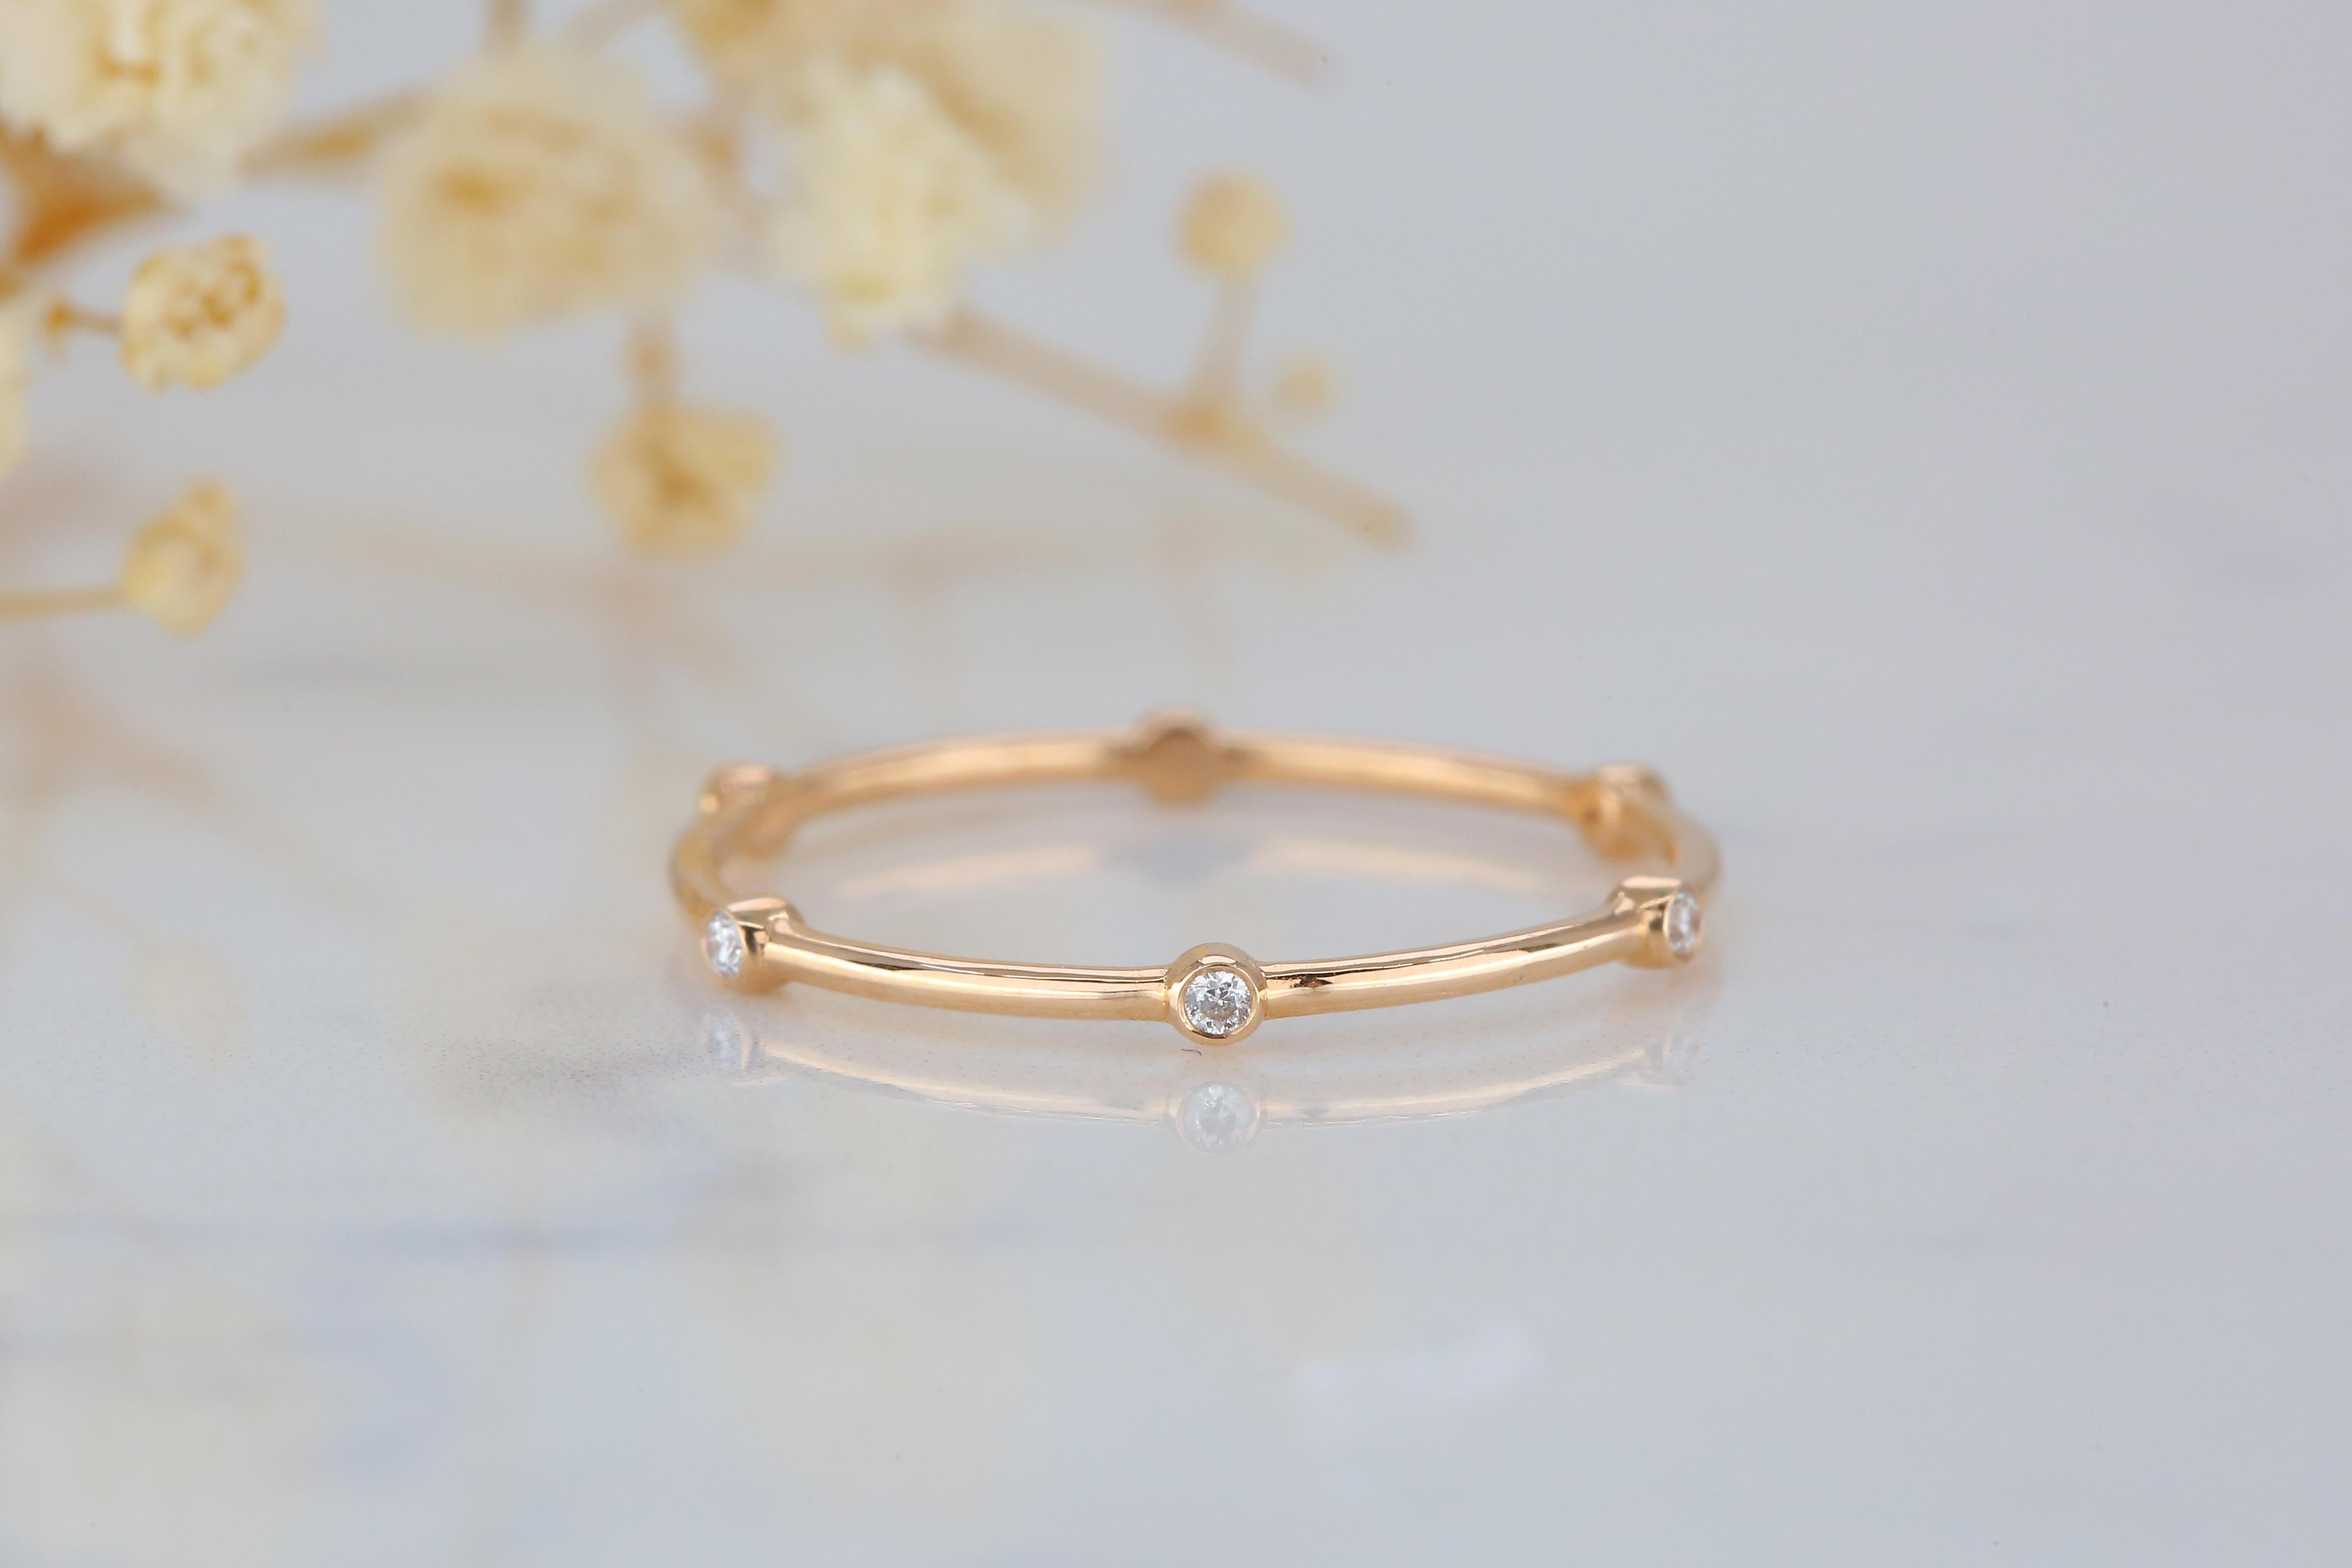 For Sale:  Six Bezel Diamond Ring, 14K Solid Gold Dainty Ring, Stackable Ring, Minimalist 7